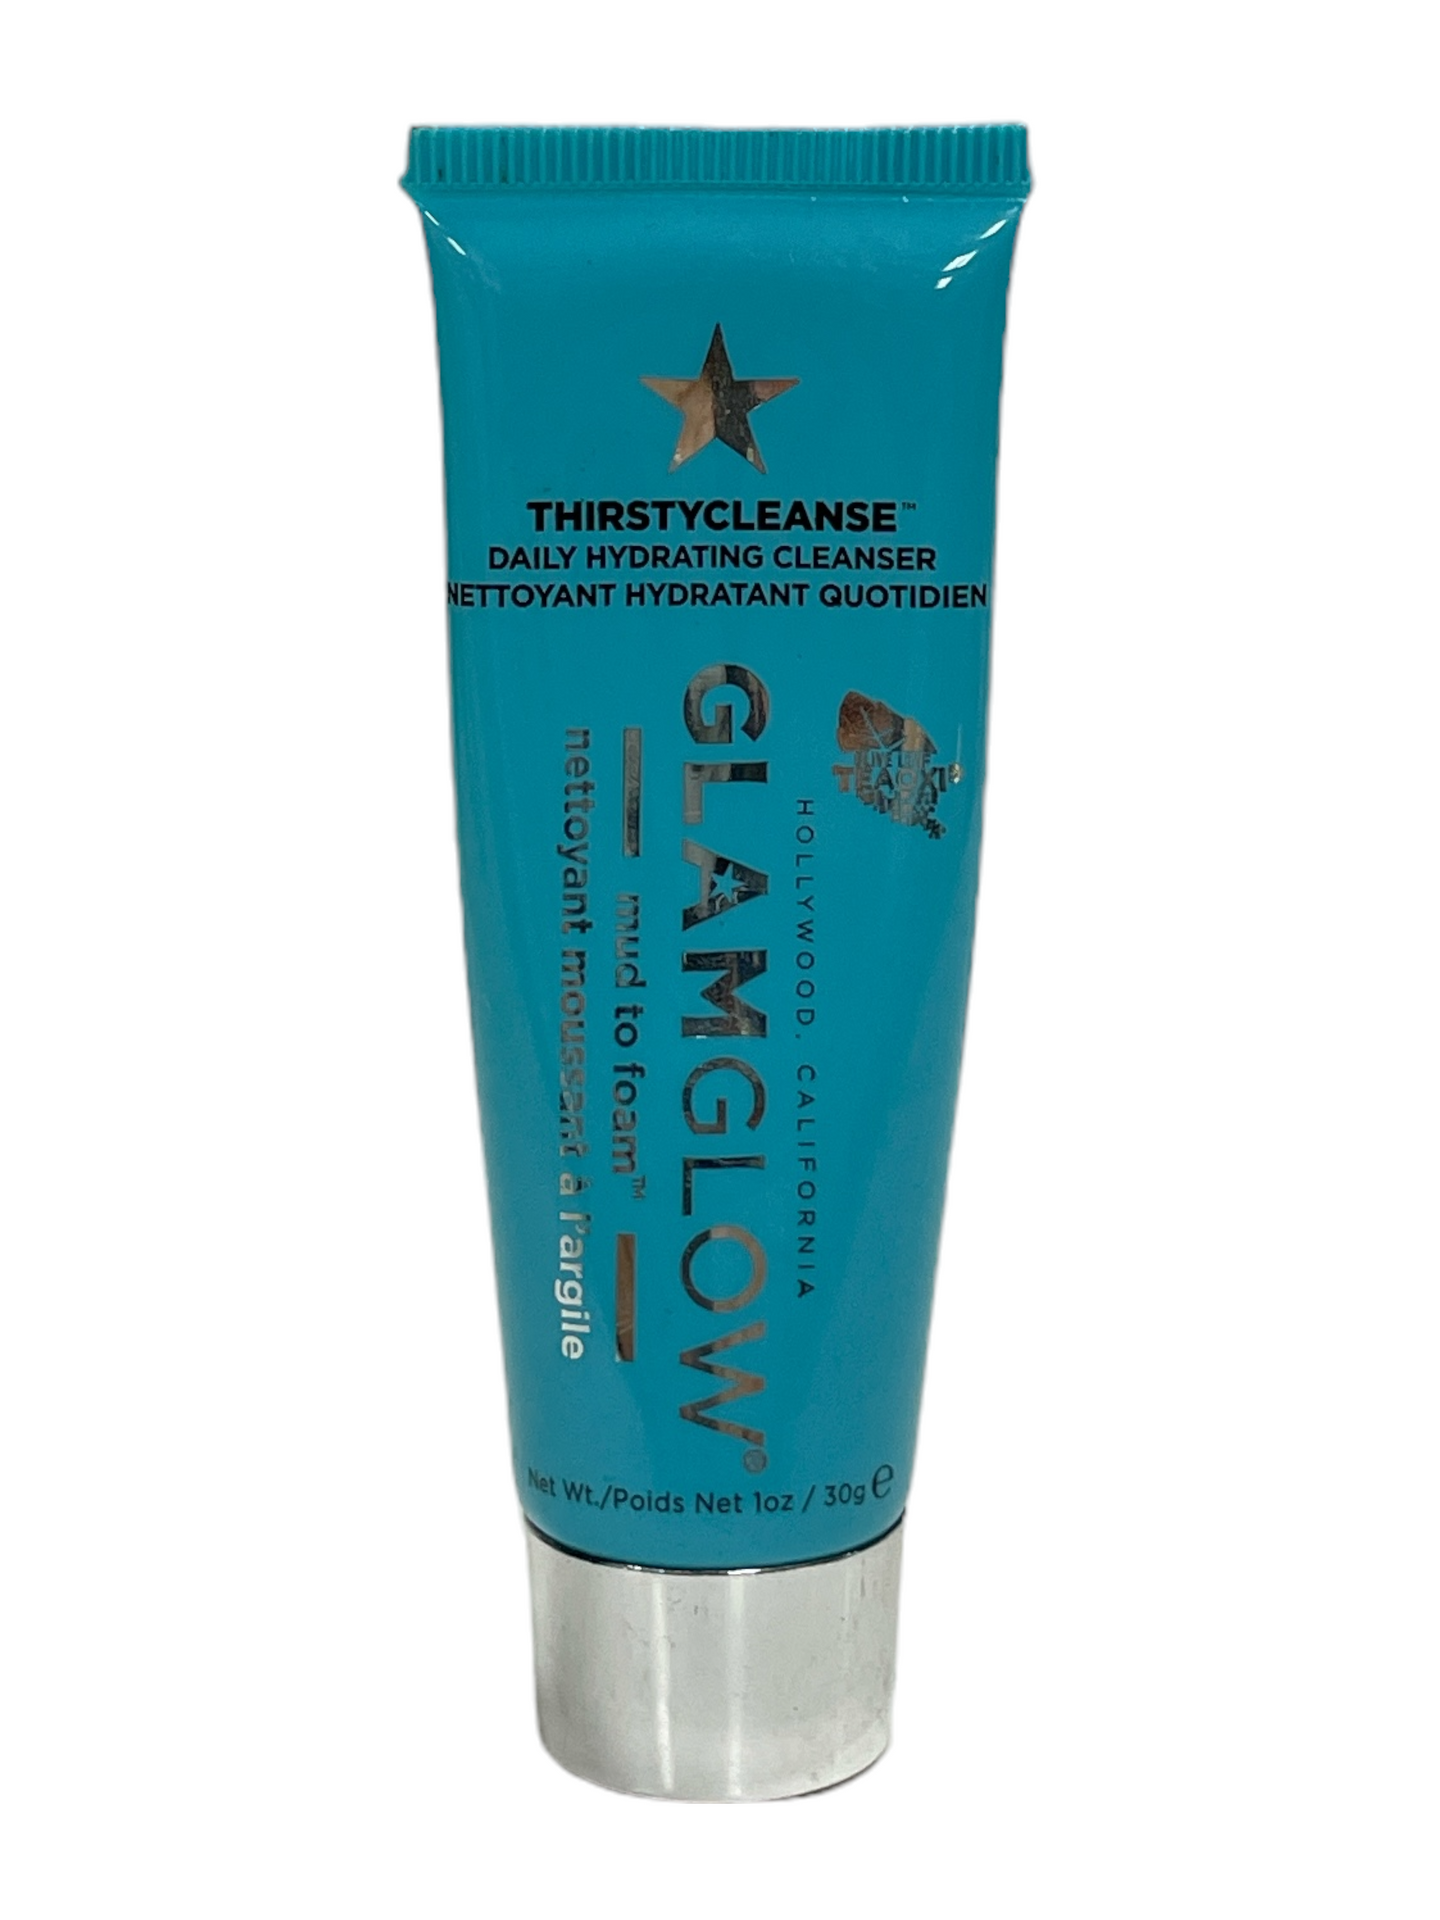 GlamGlow ThirstyCleanse Daily Hydrating Cleanser (1oz / 30g)